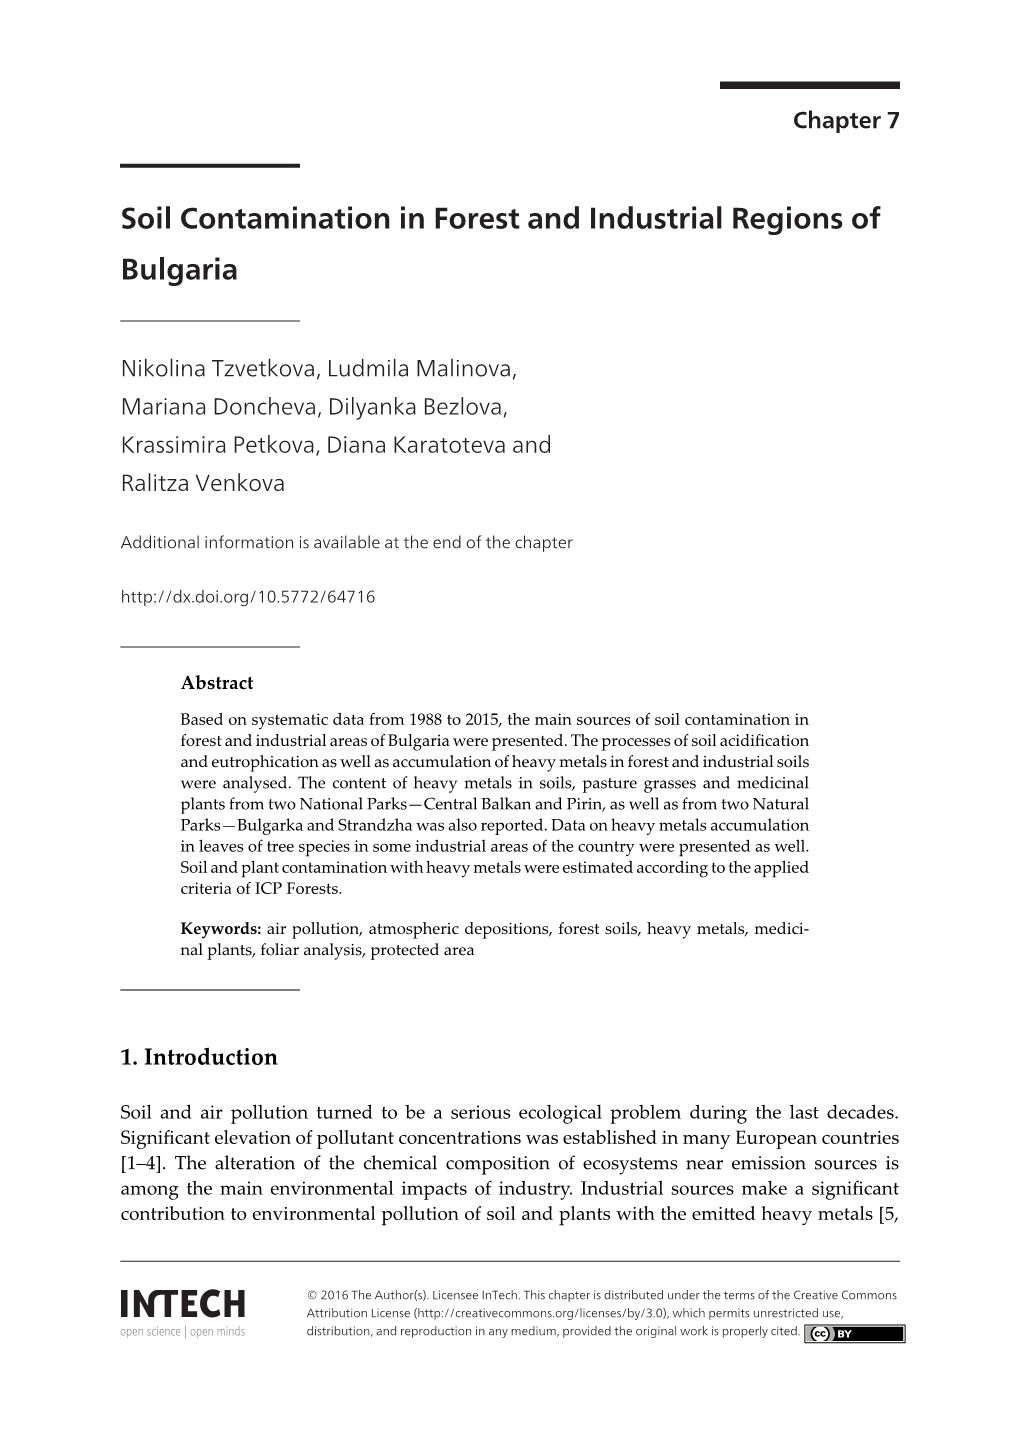 Soil Contamination in Forest and Industrial Regions of Bulgaria